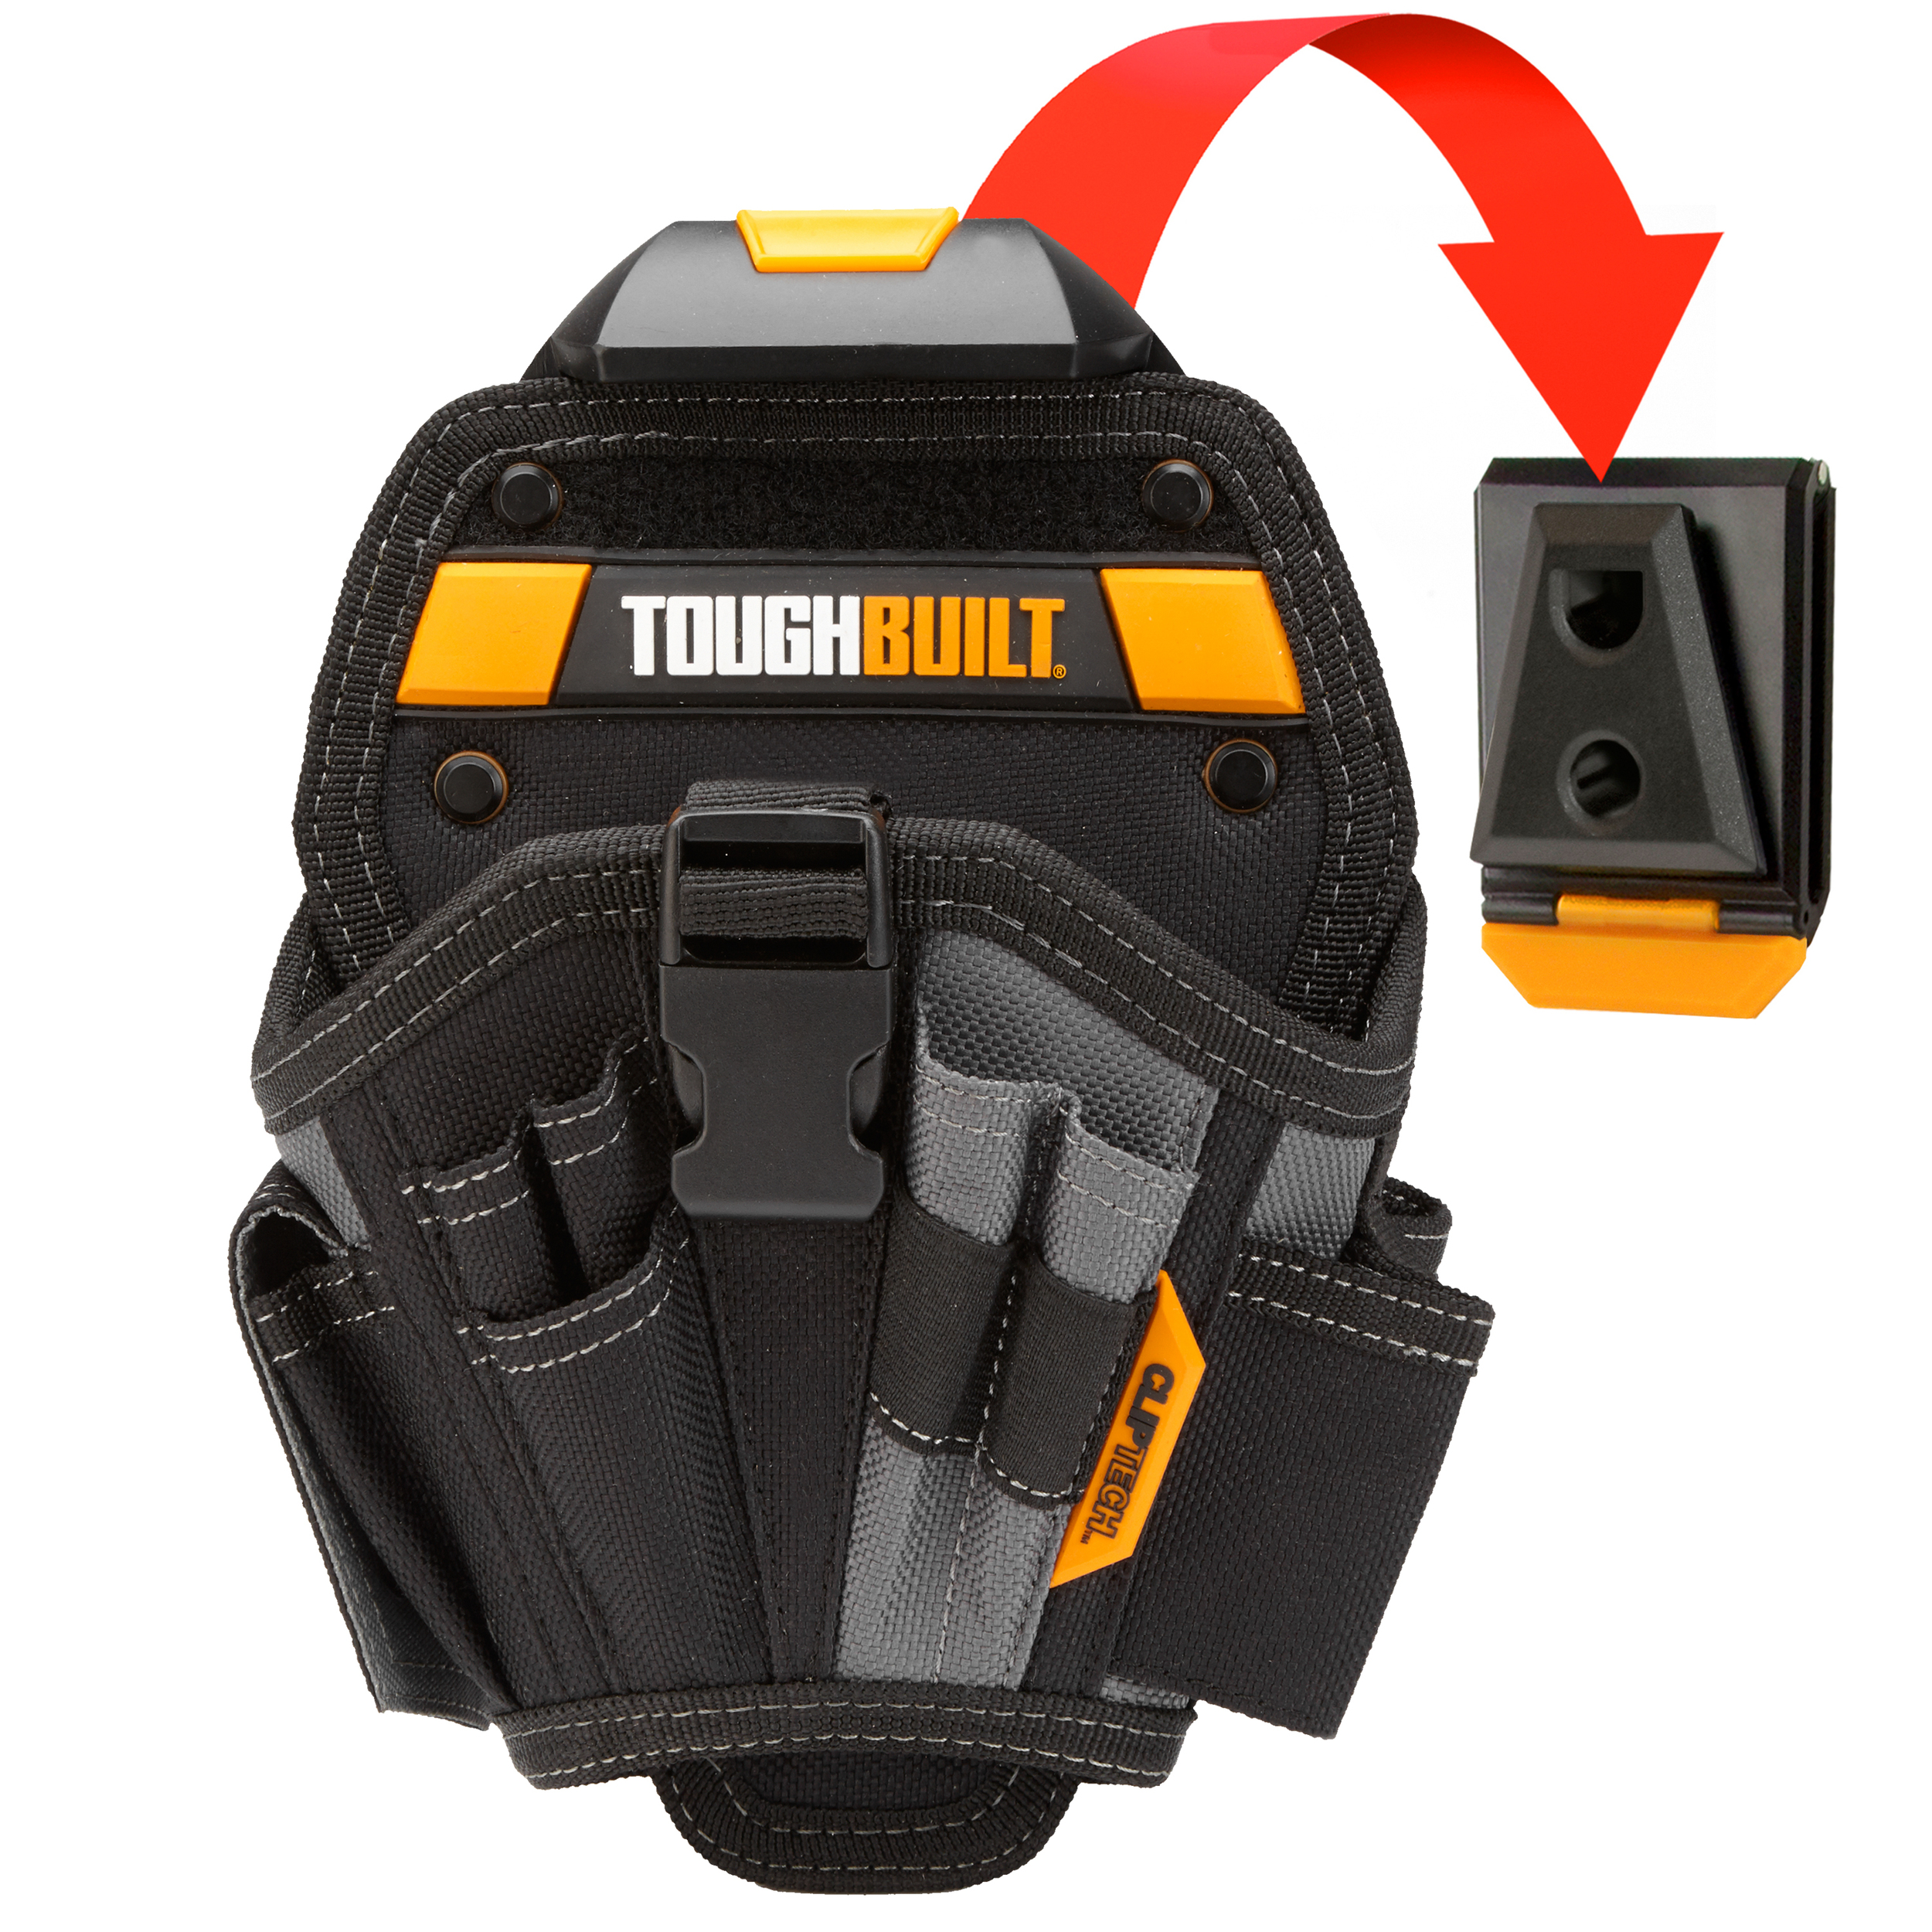 TB-CT-111-3 ToughBuilt Tradesman Tool Belt Set Padded Belt 27 Pockets 2 Patented ClipTech Hubs Deluxe Organizer Premium Quality Heavy Duty Includes 2 Pouches Pry Bar Loop 3 Piece